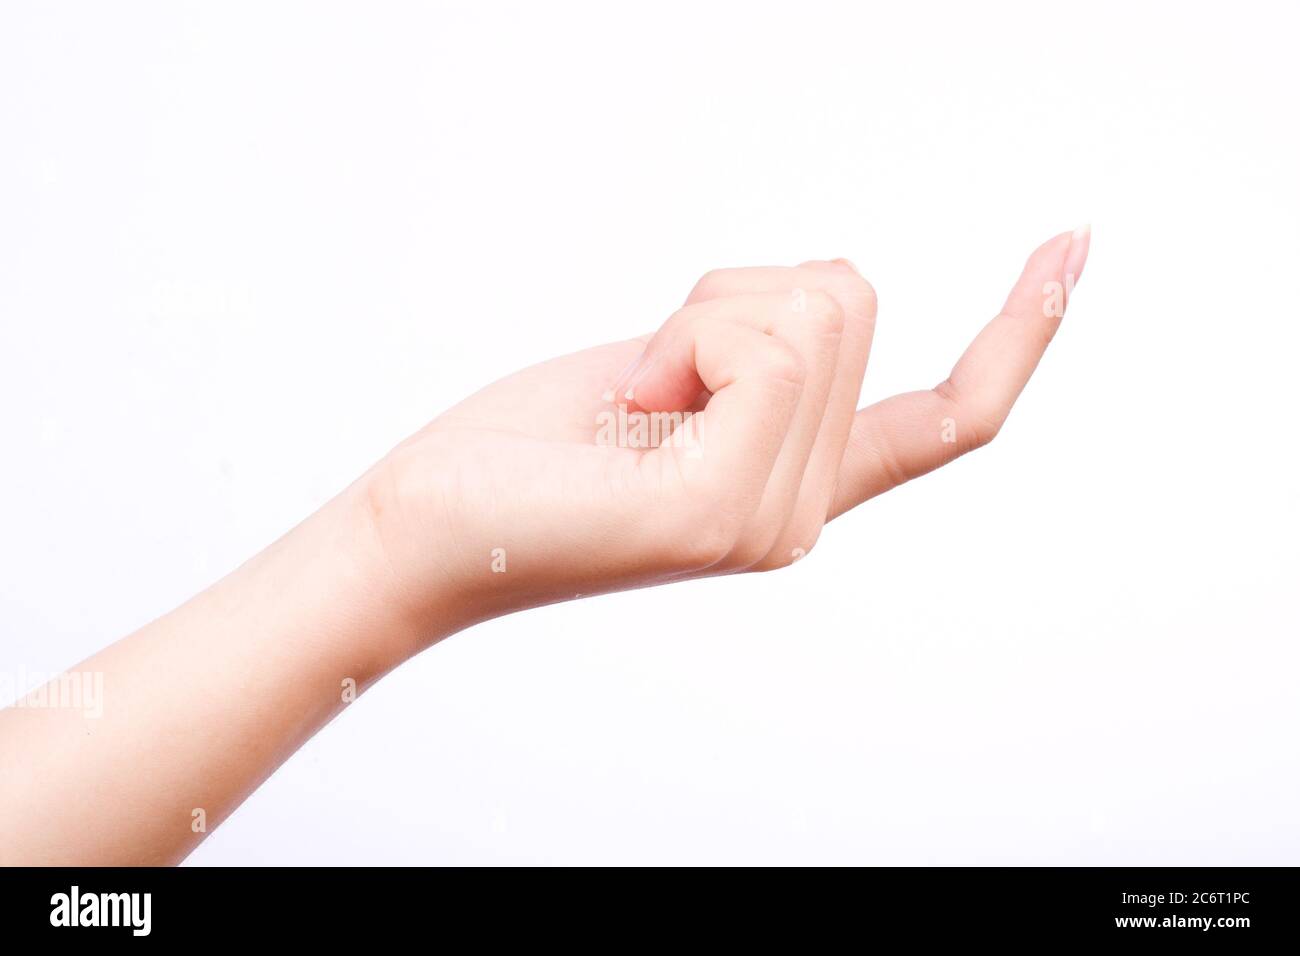 finger hand symbols isolated come here follow me or beckoning the finger on the white background Stock Photo